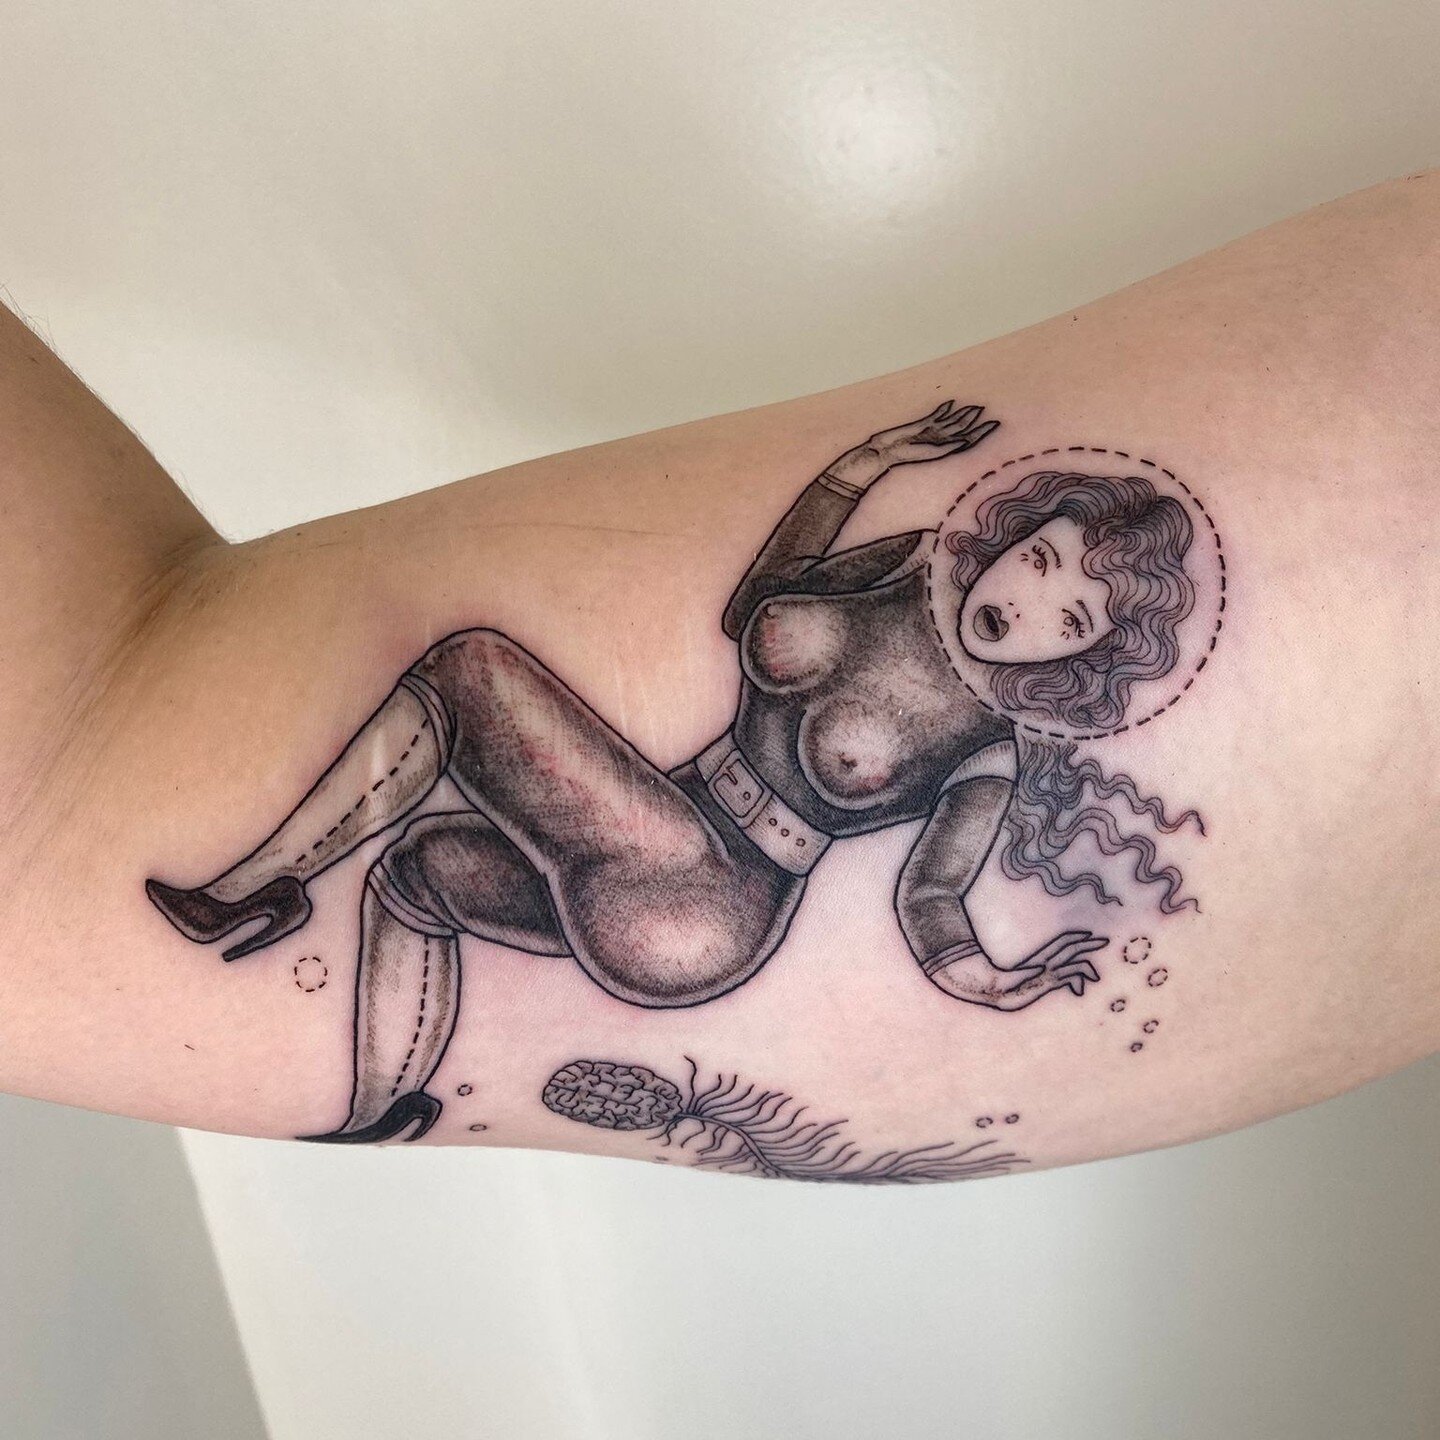 Space babe by @emilymalice @scorpiomarstattoo⁠
Contact directly to make an appointment for early 2023⁠
⁠
⁠
⁠
#emilymalice #scorpiomarstattoo #londontattoo #finelinetattoo #spacetattoo #spacebabe